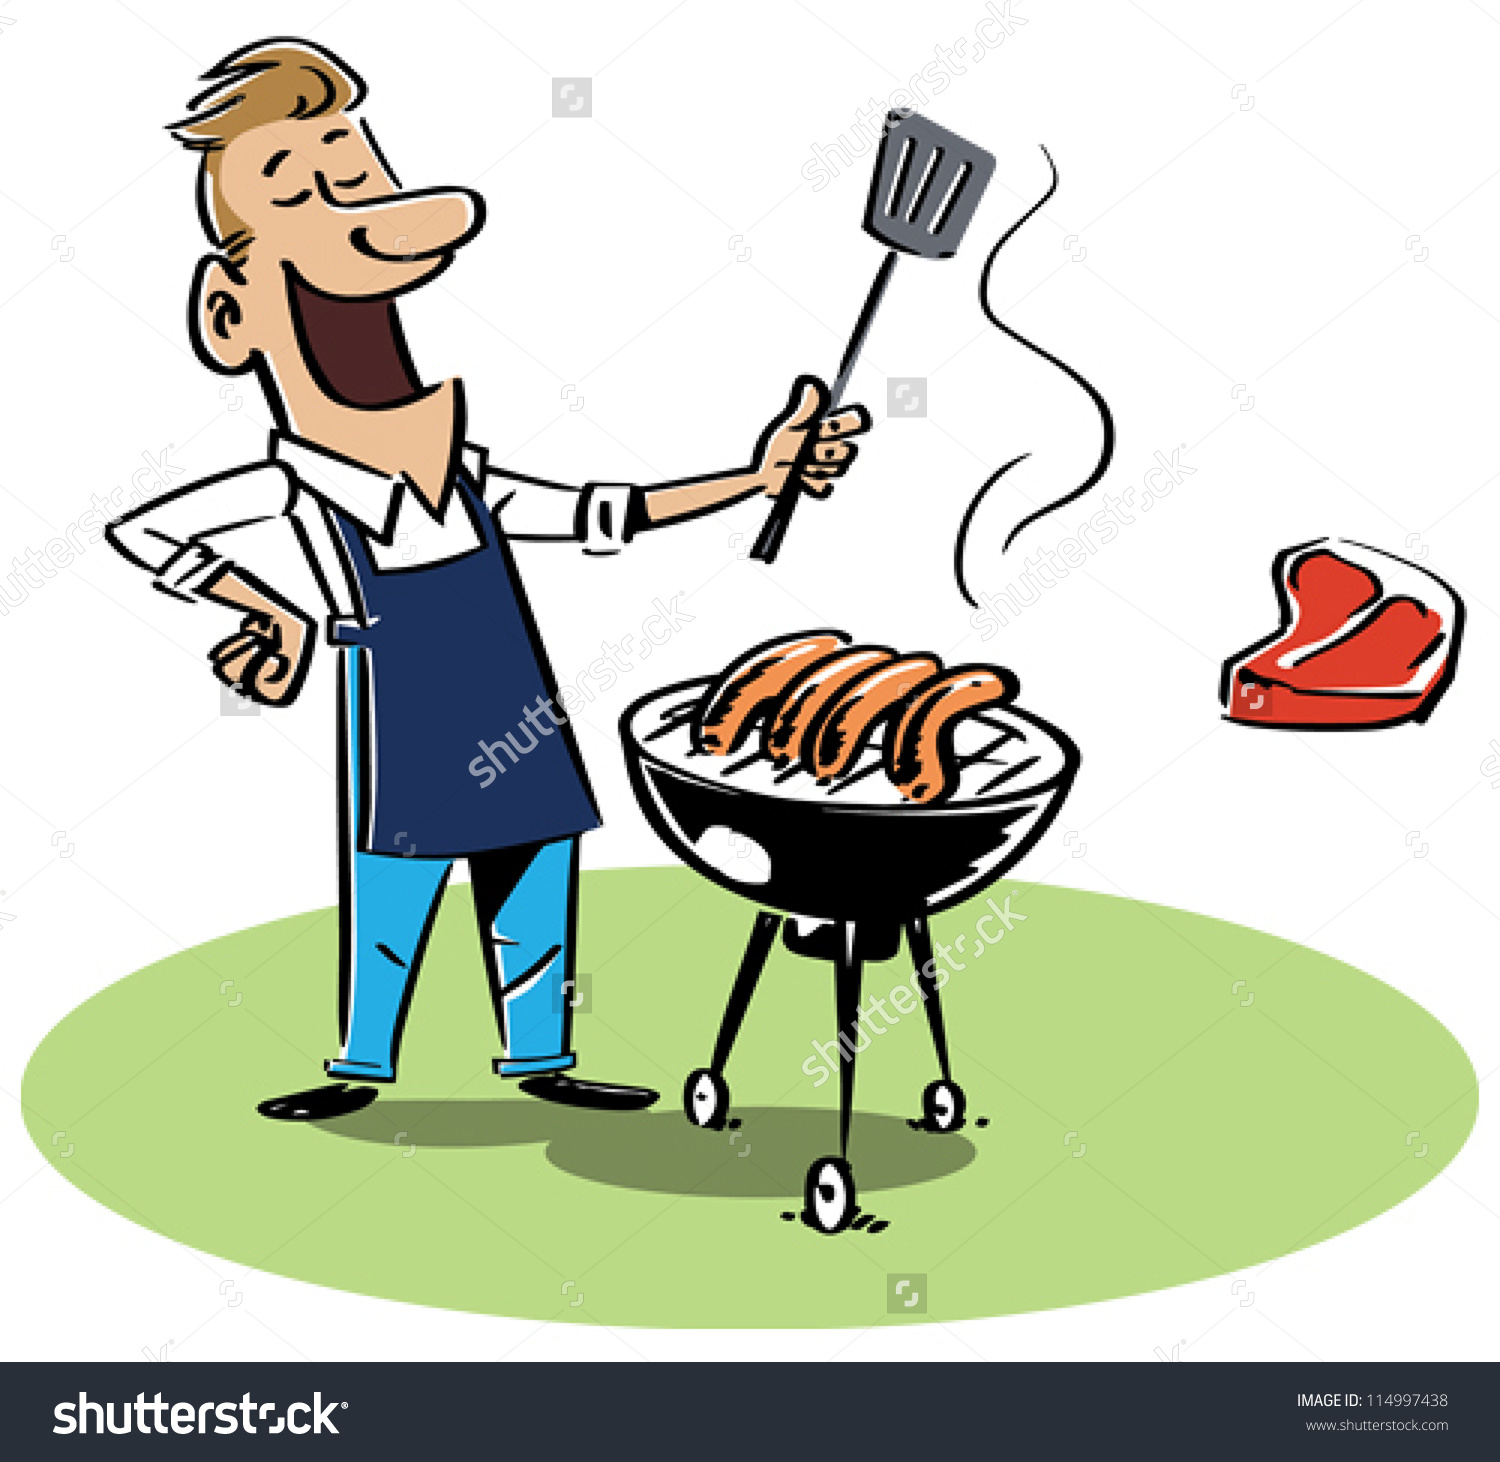 clipart of man grilling - photo #29